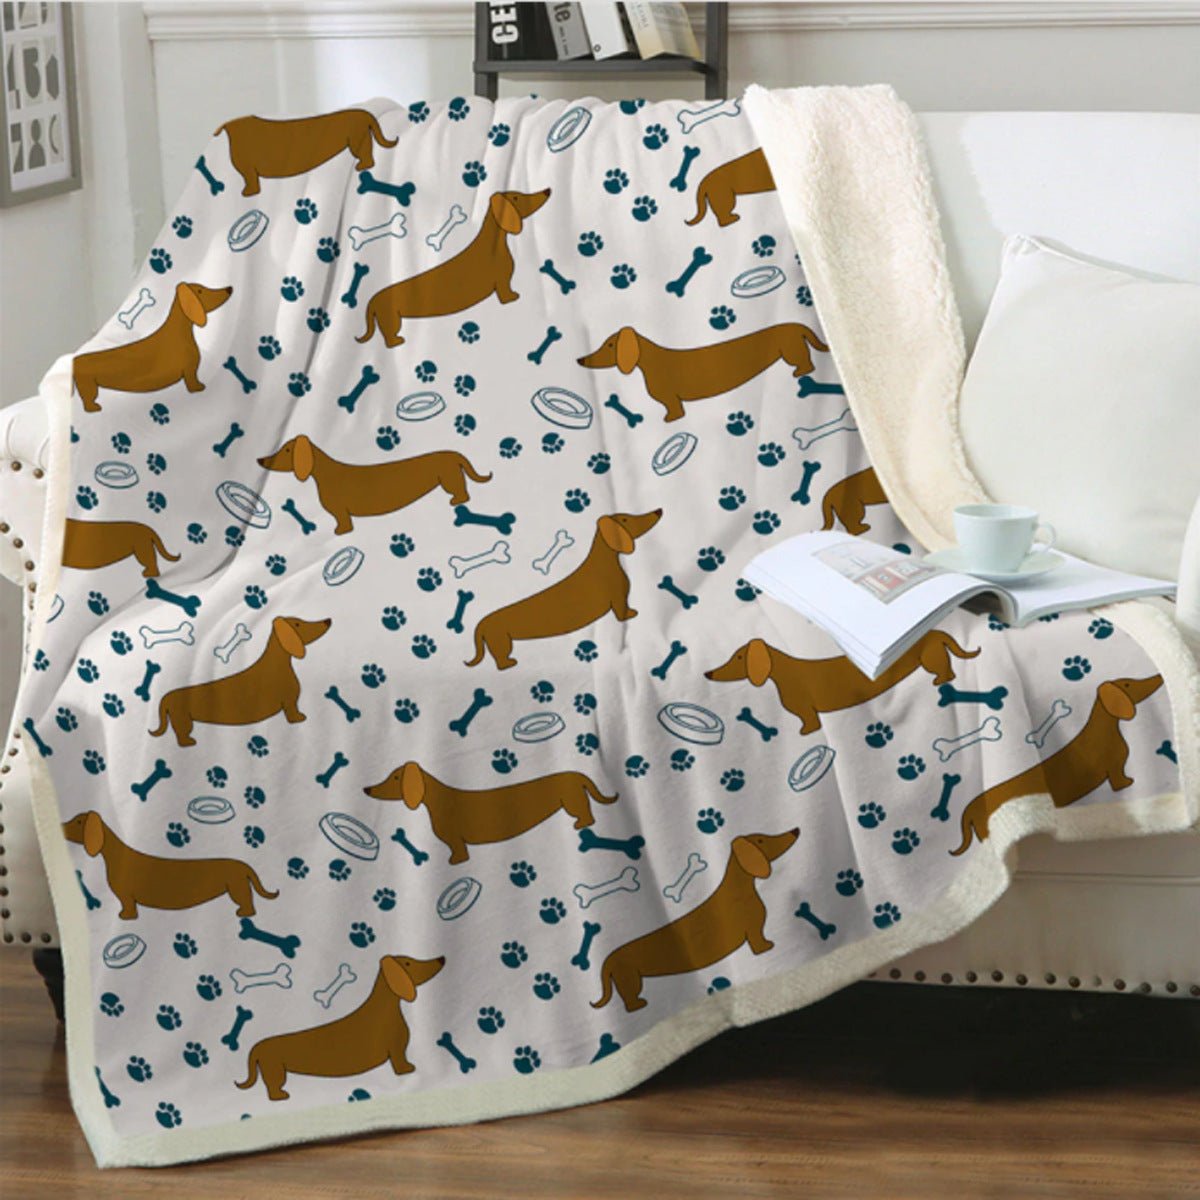 Cute Dog Print Fleece Blankets for Christmas-Blankets-1-11-40*60 inches-Free Shipping at meselling99